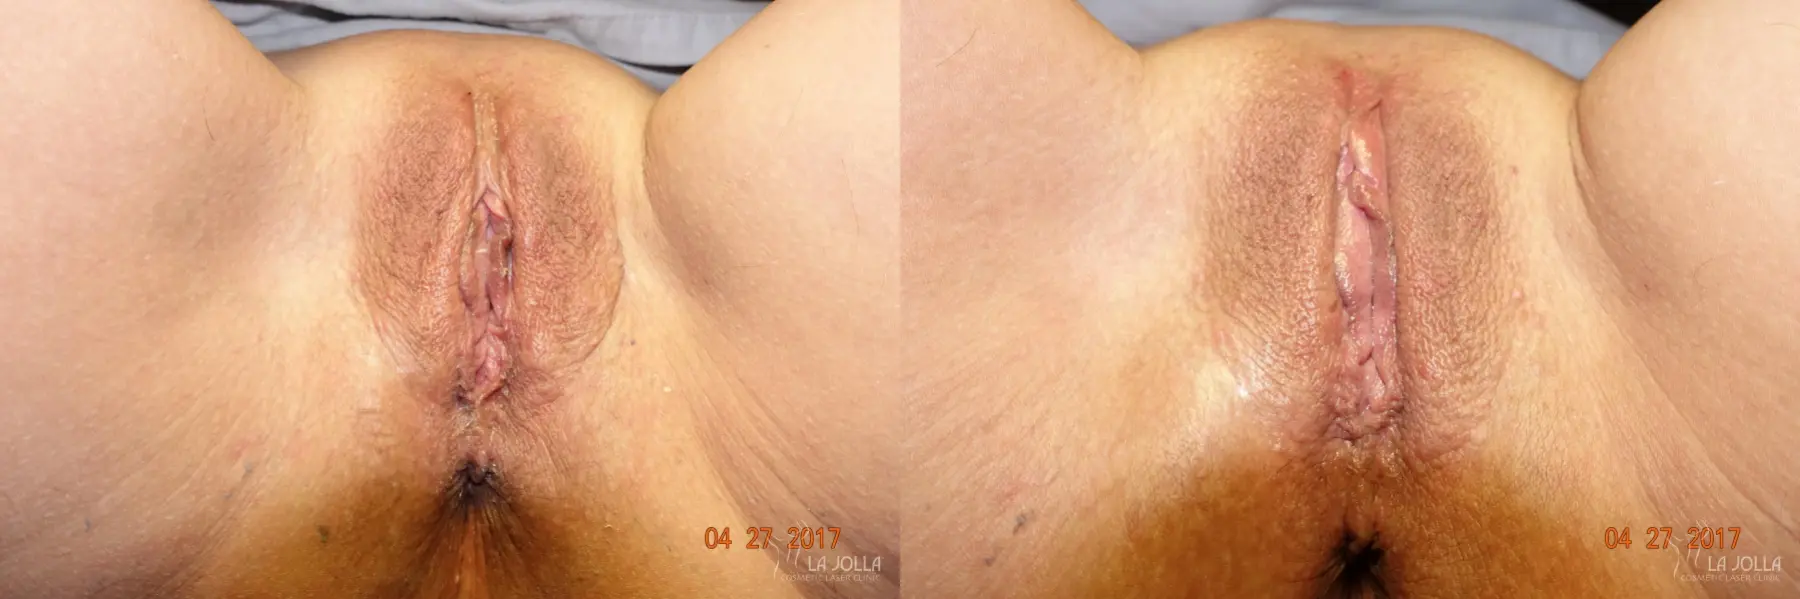 ThermiVa®: Patient 7 - Before and After  